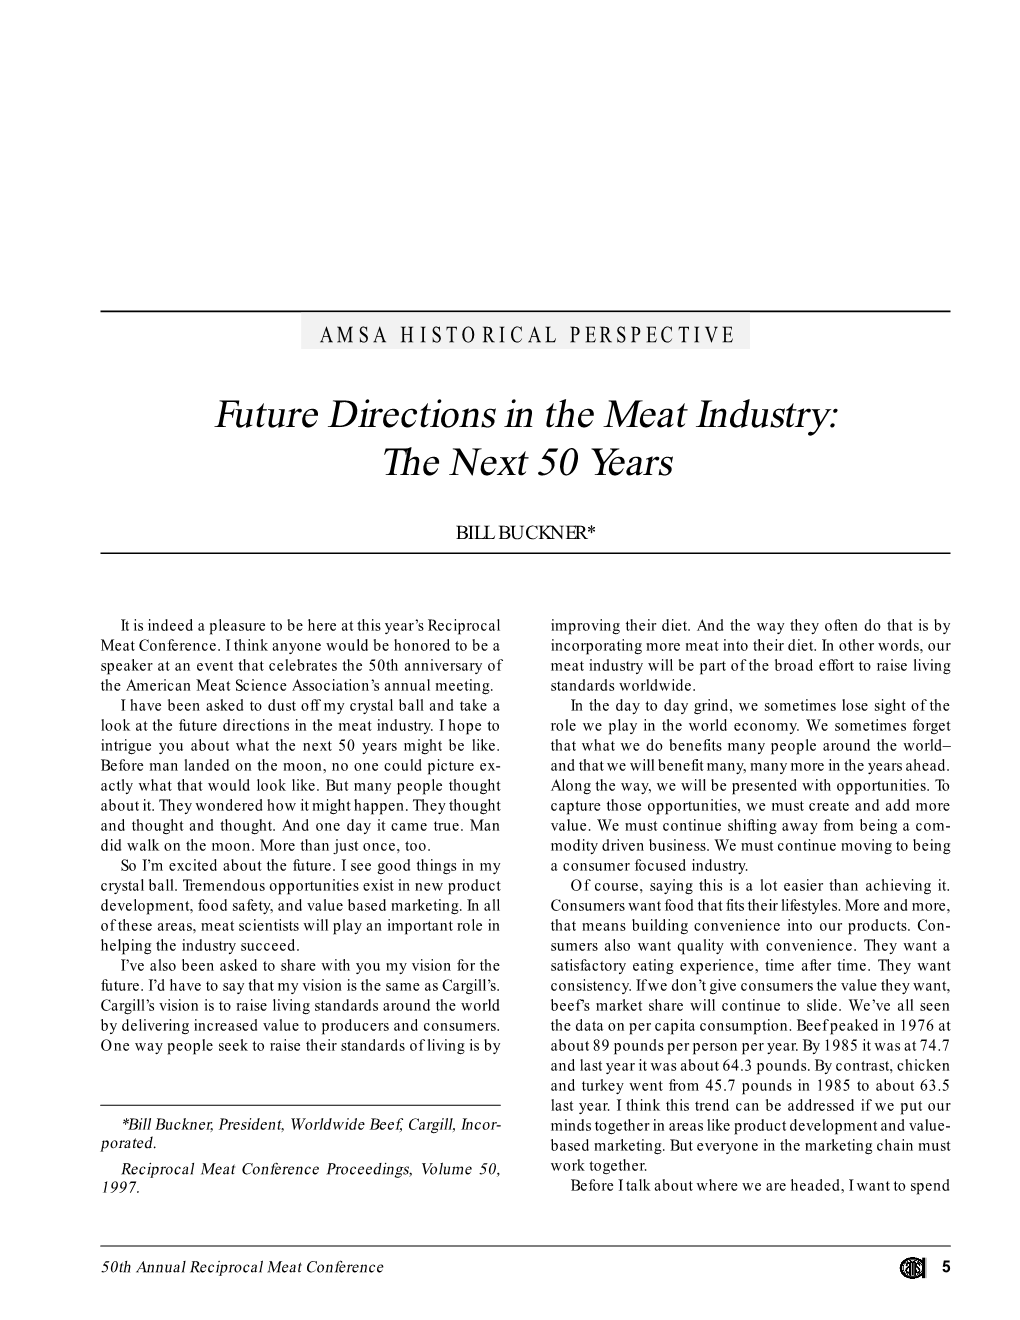 Future Directions in the Meat Industry: the Next 50 Years